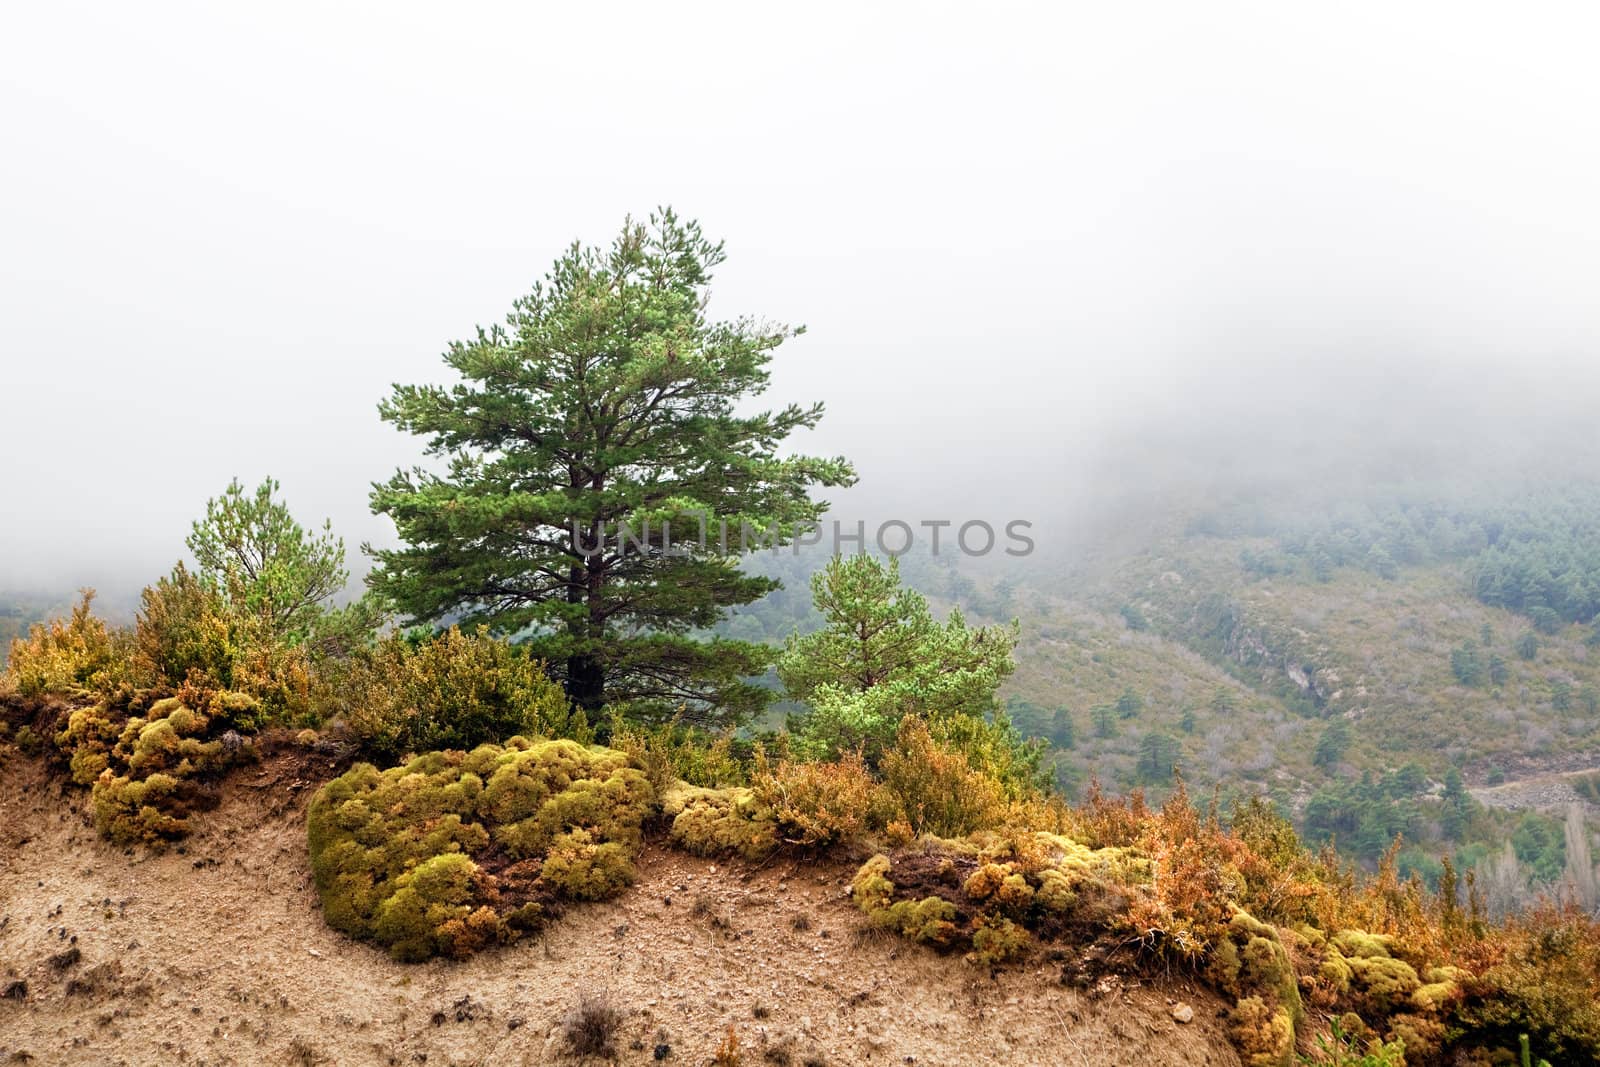 Detail misty mountain landscape with pine-tree